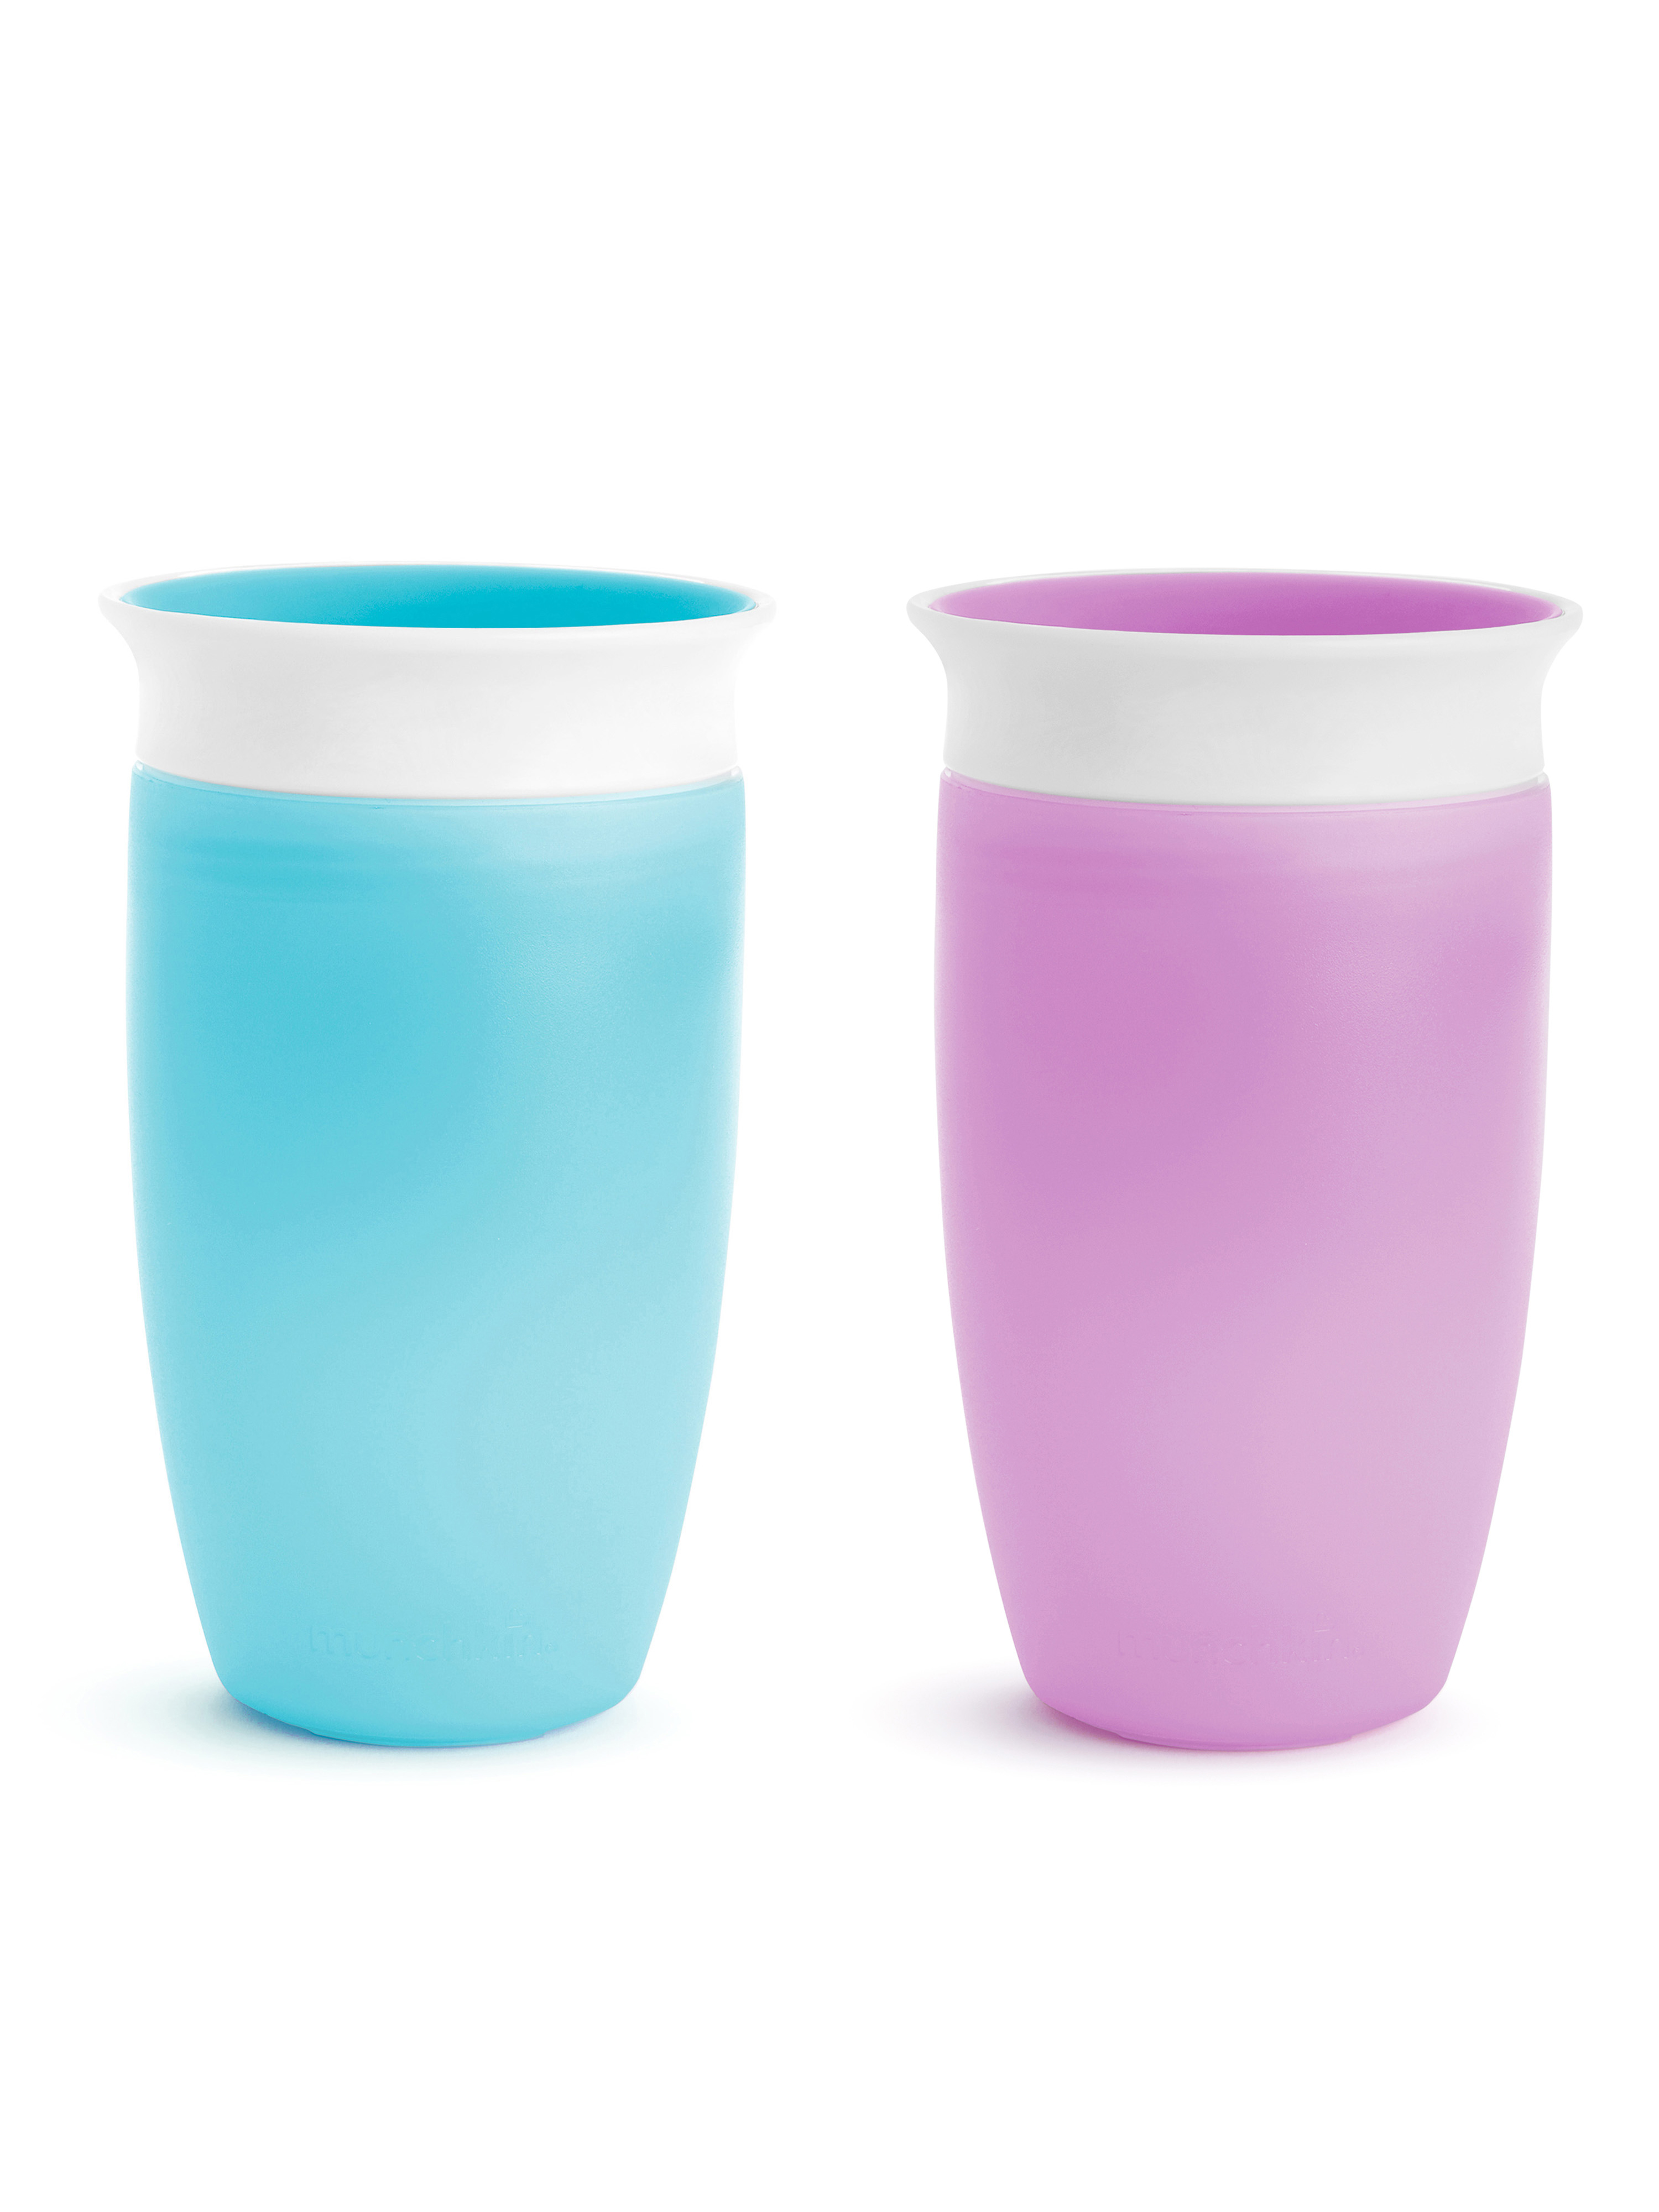 Munchkin® Miracle® 360° Spoutless Sippy Cup, 10 oz, Blue/Purple, Unisex, 2 Pack - image 5 of 6